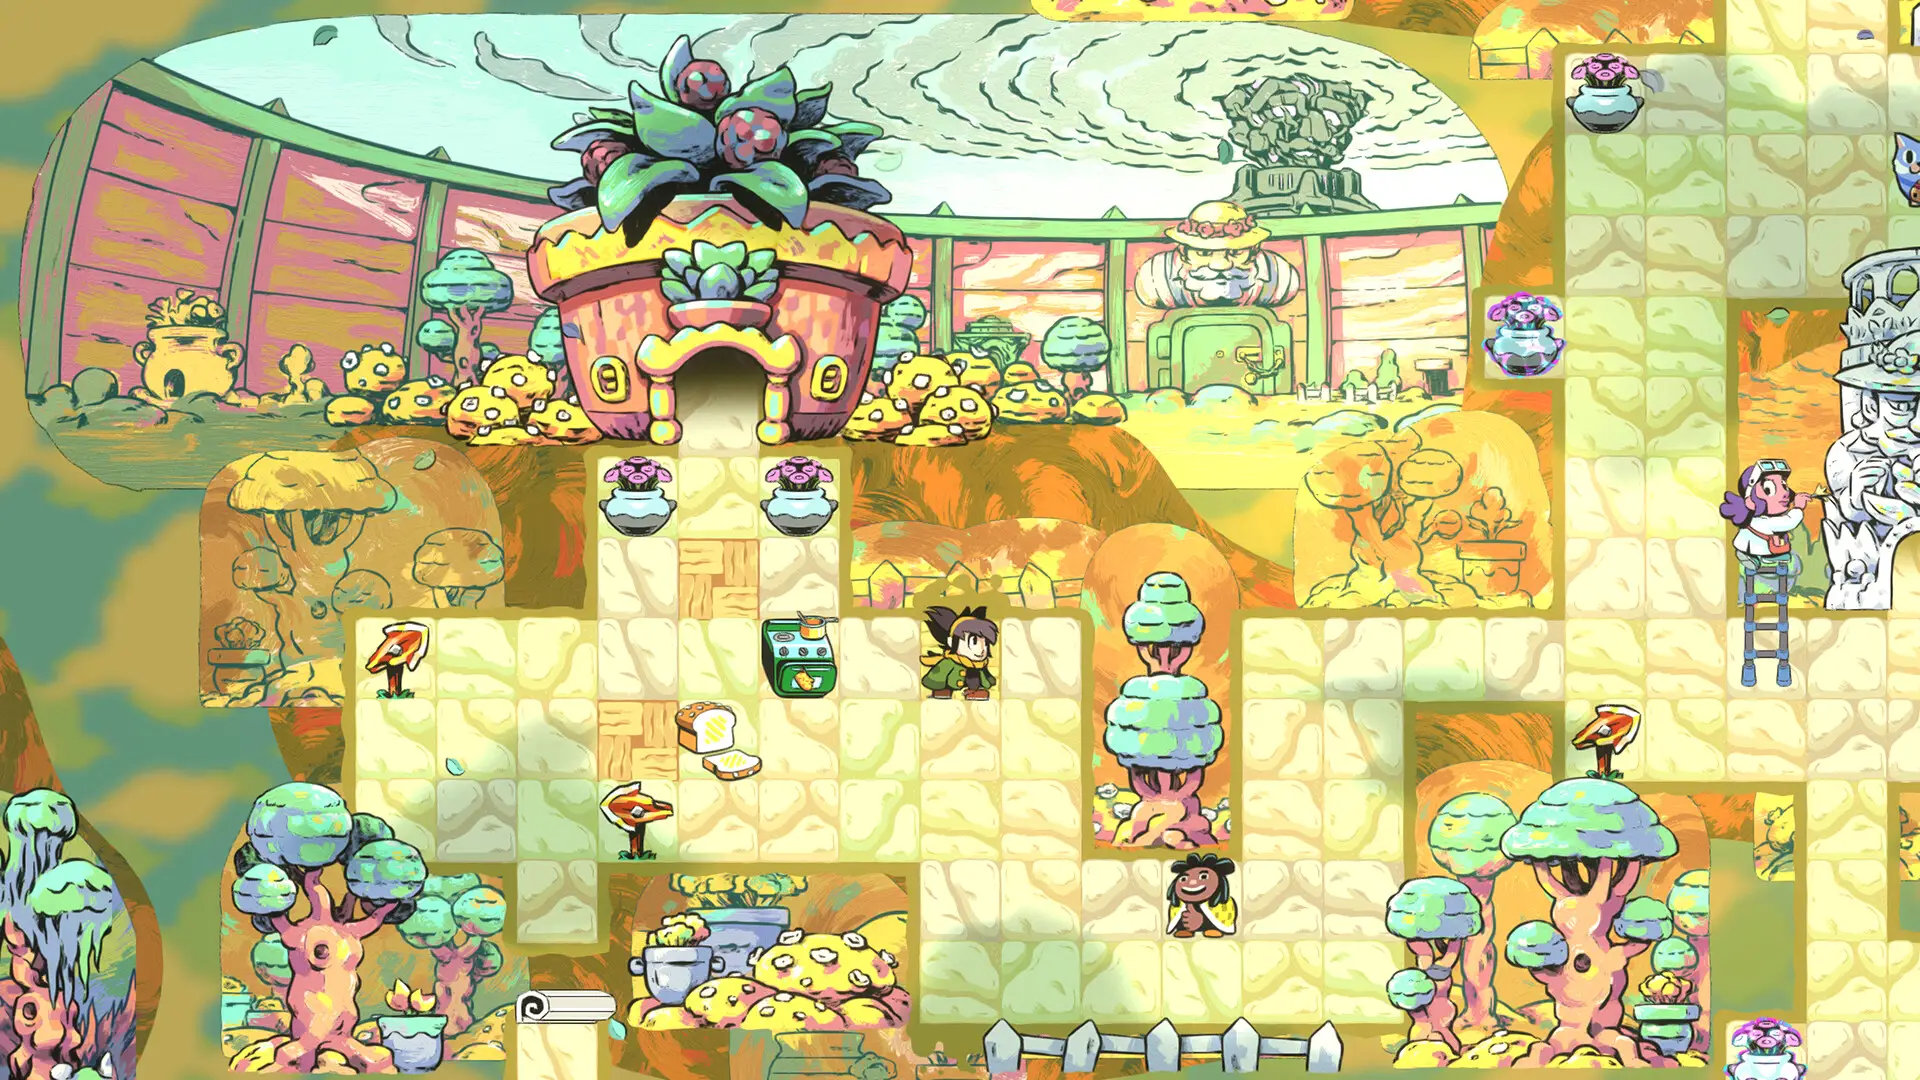 Braid Artist’s Newest Game ‘Arranger: A Role-Puzzling Adventure’ Revealed in Trailer